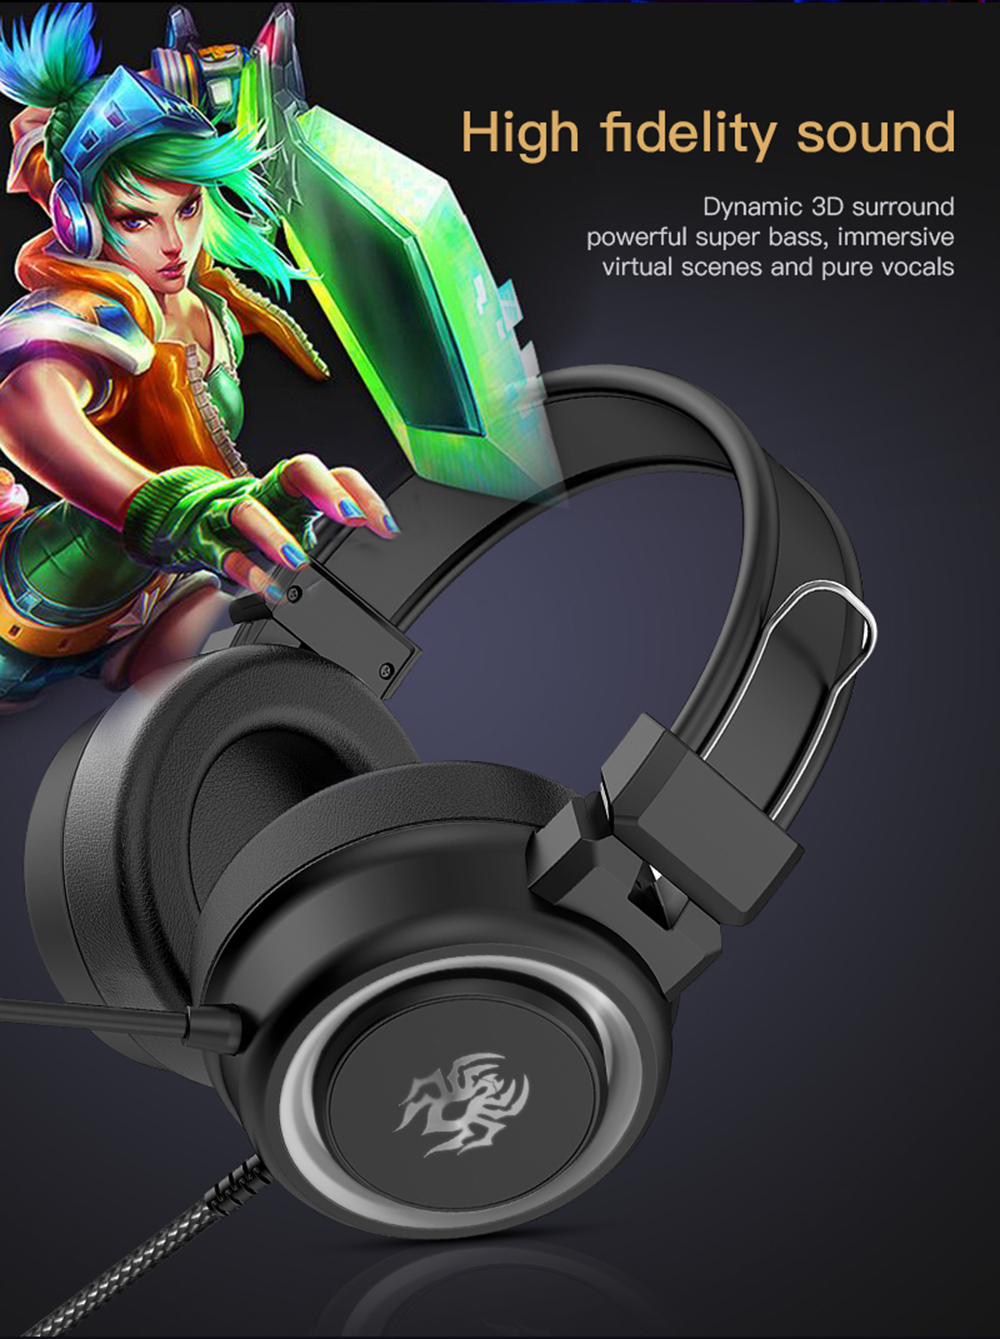 Yoro-V5-RGB-Gaming-headphones-50mm-Unit-Super-Bass-Stereo-with-Microphone-Over-Ear-headphone-Wired-f-1814064-4